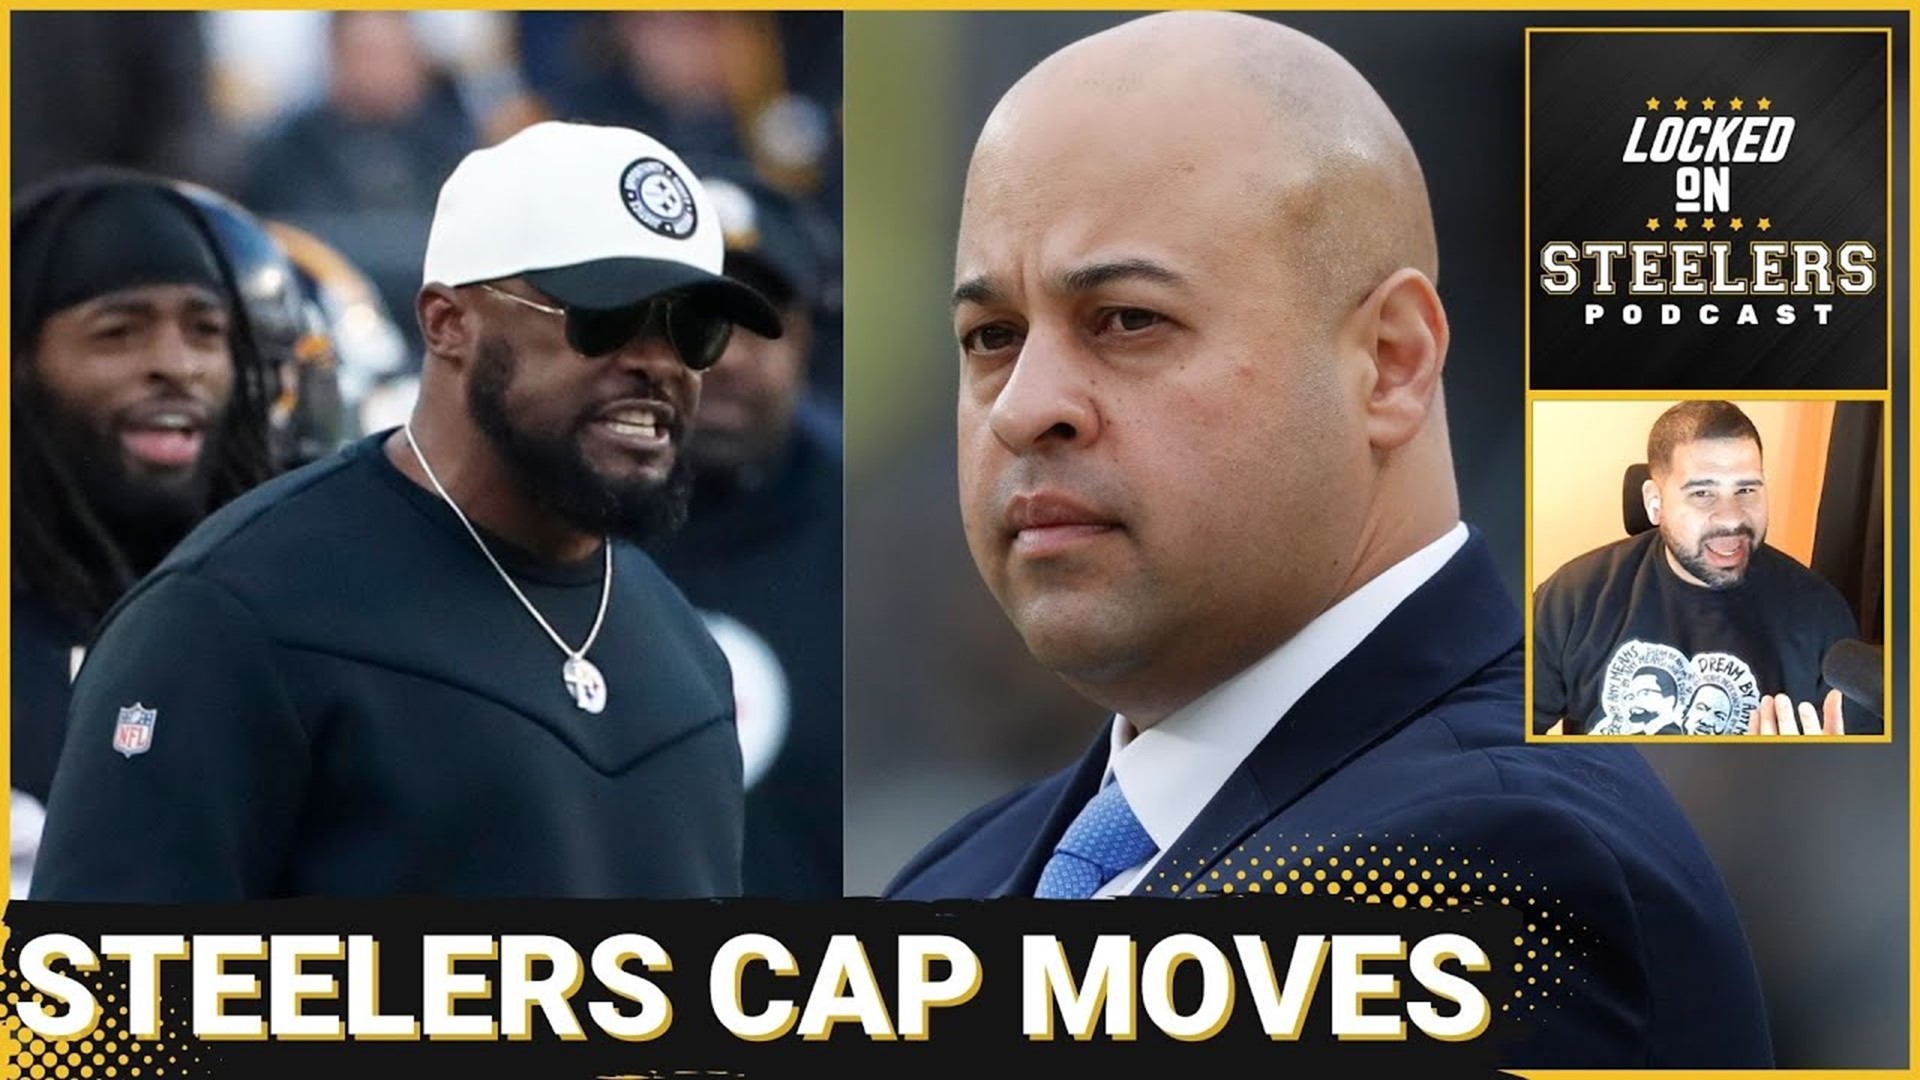 How can Omar Khan and Mike Tomlin make big steps in the offseason to compete with other top AFC playoff teams?